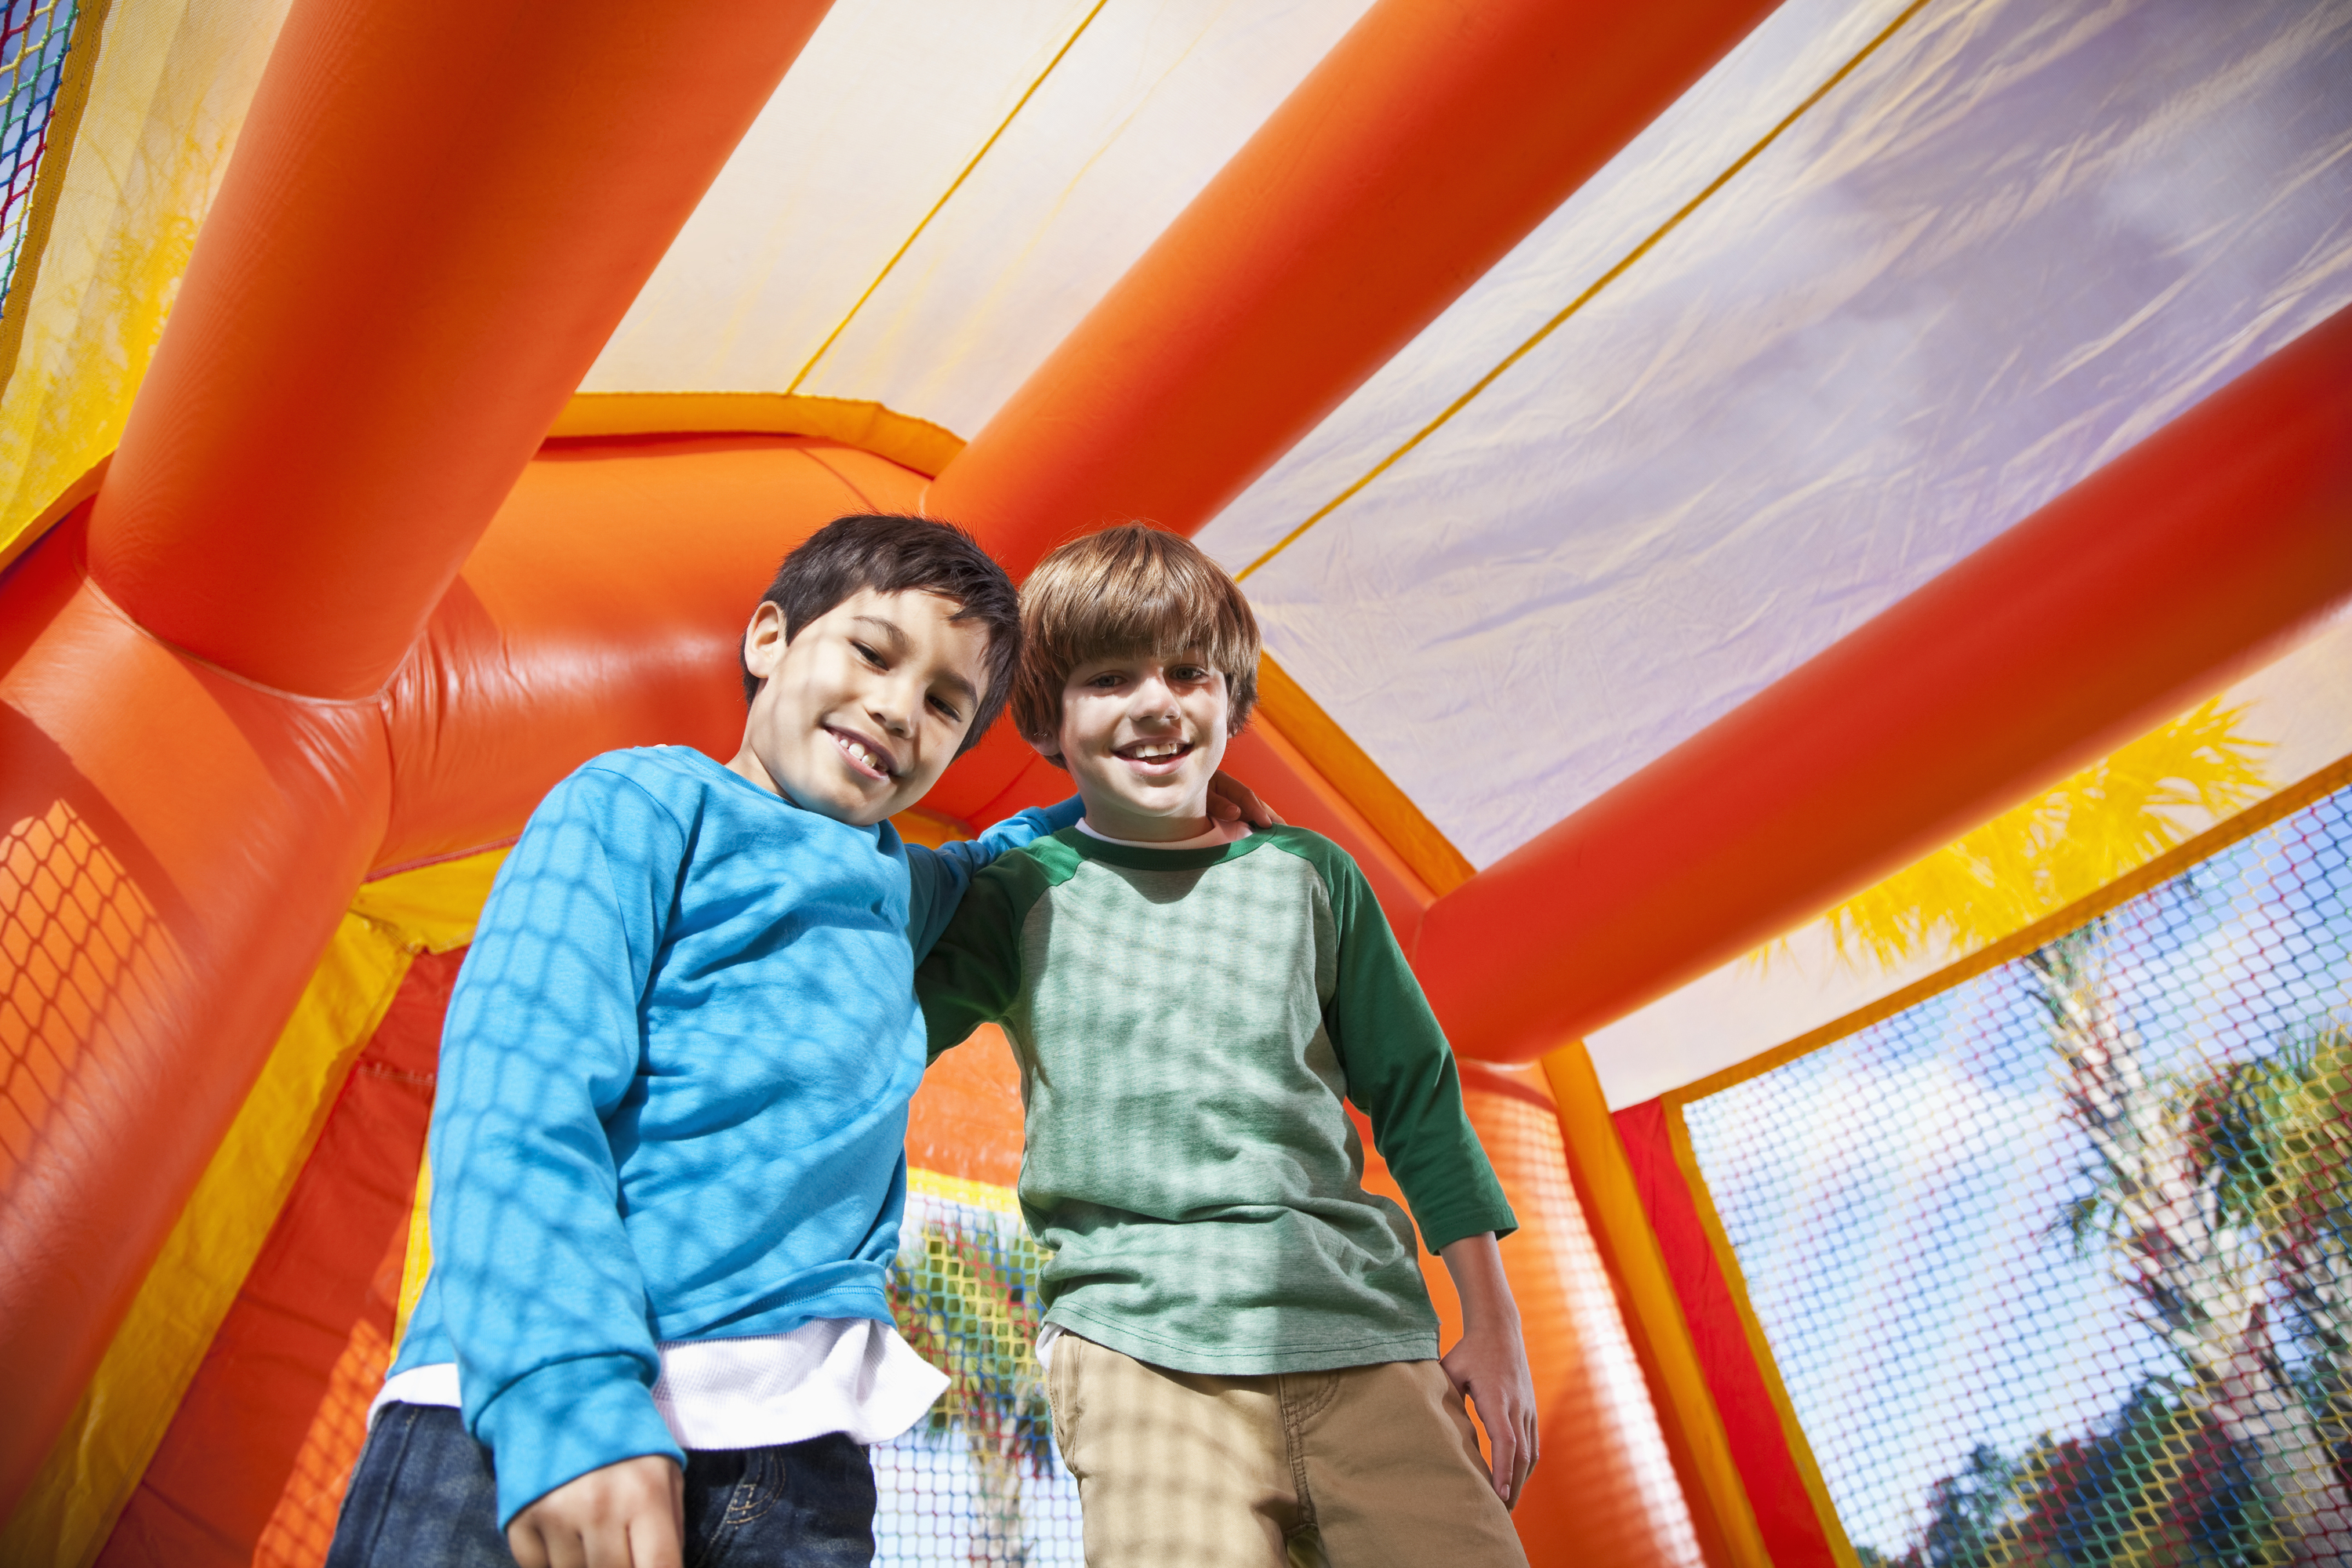 Create memories with Obstacle Course Rental in Groveland, FL